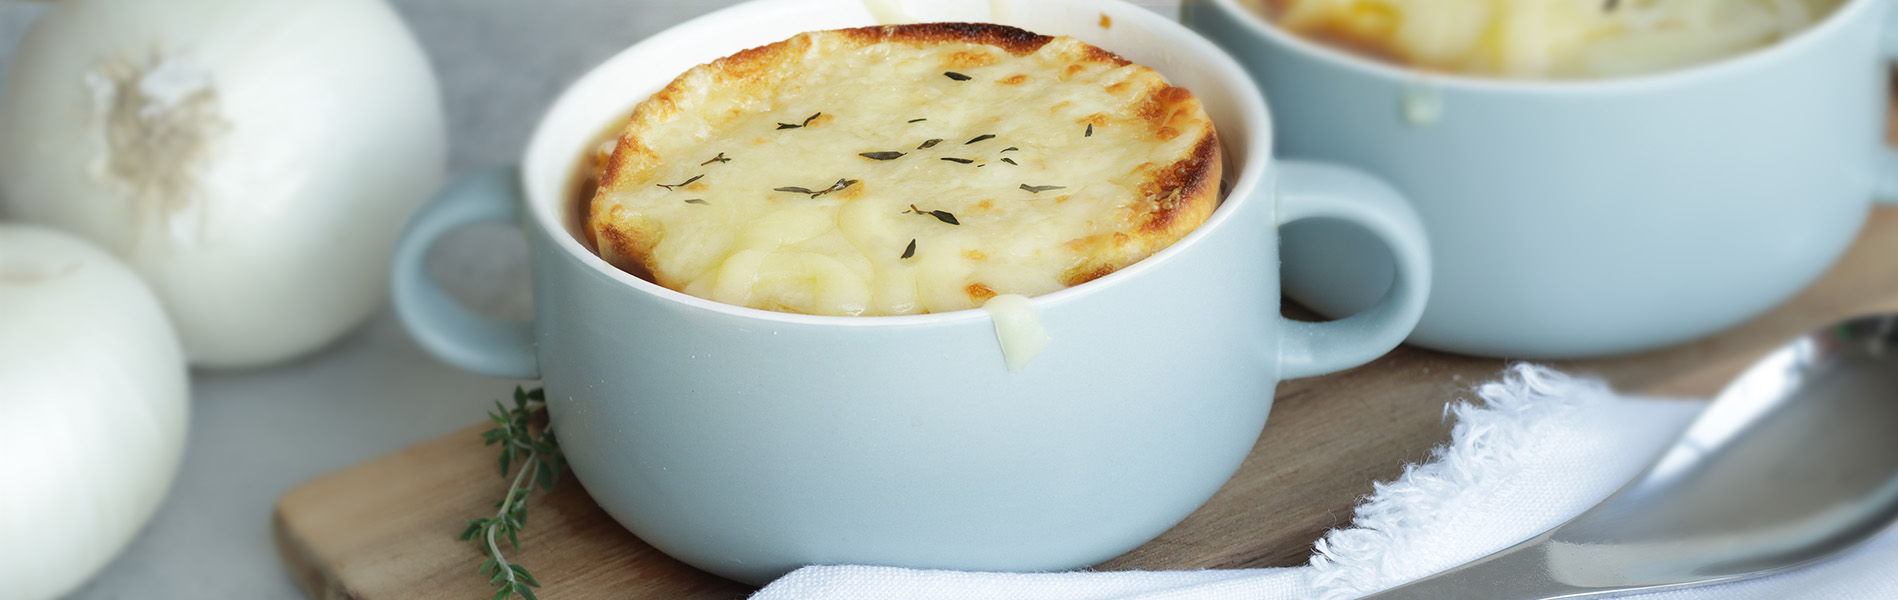 French Onion Soup, topped with half of an Artesano Brioche Bun, with melted Parmesan and Gruyere cheese